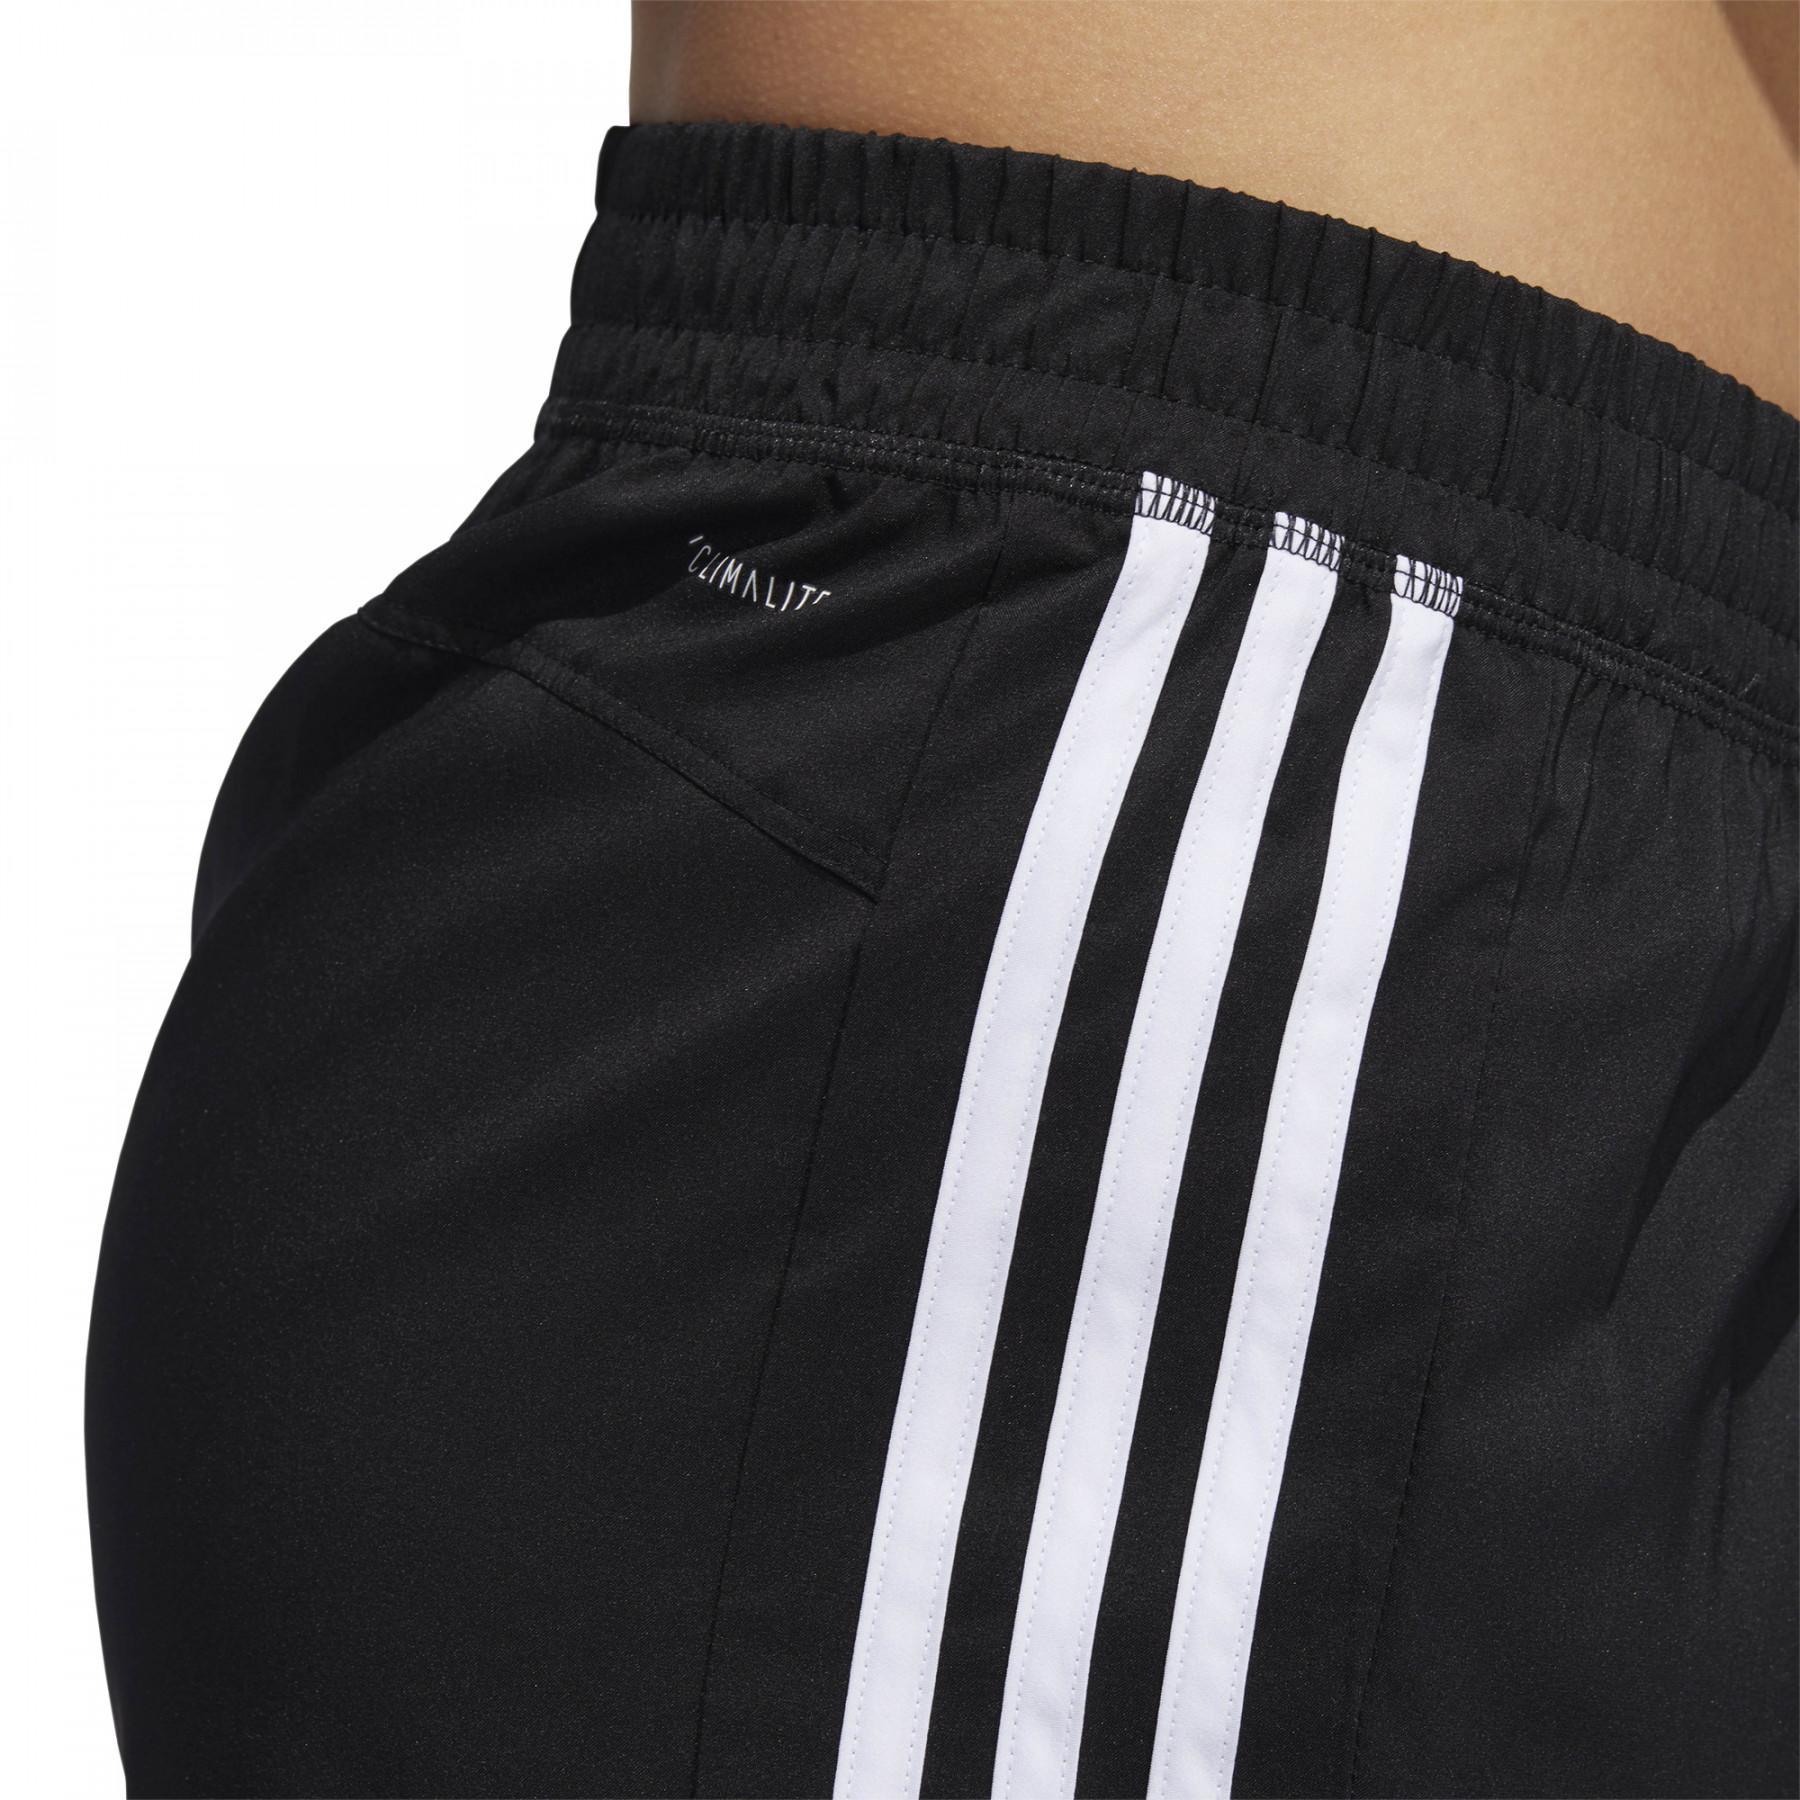 Short femme adidas Pacer 3 bandes Woven